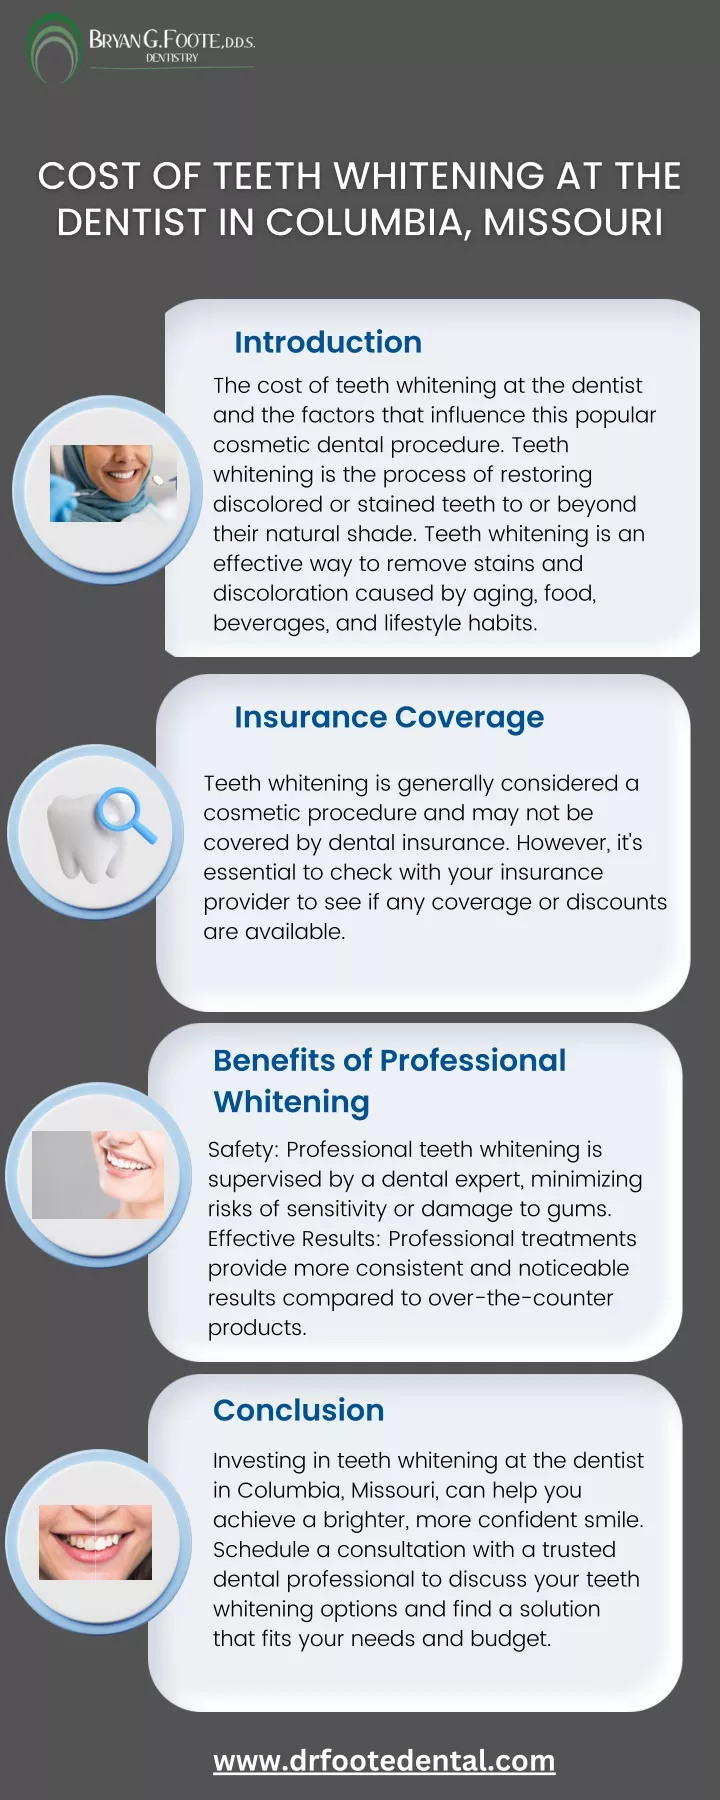 introduction the cost of teeth whitening